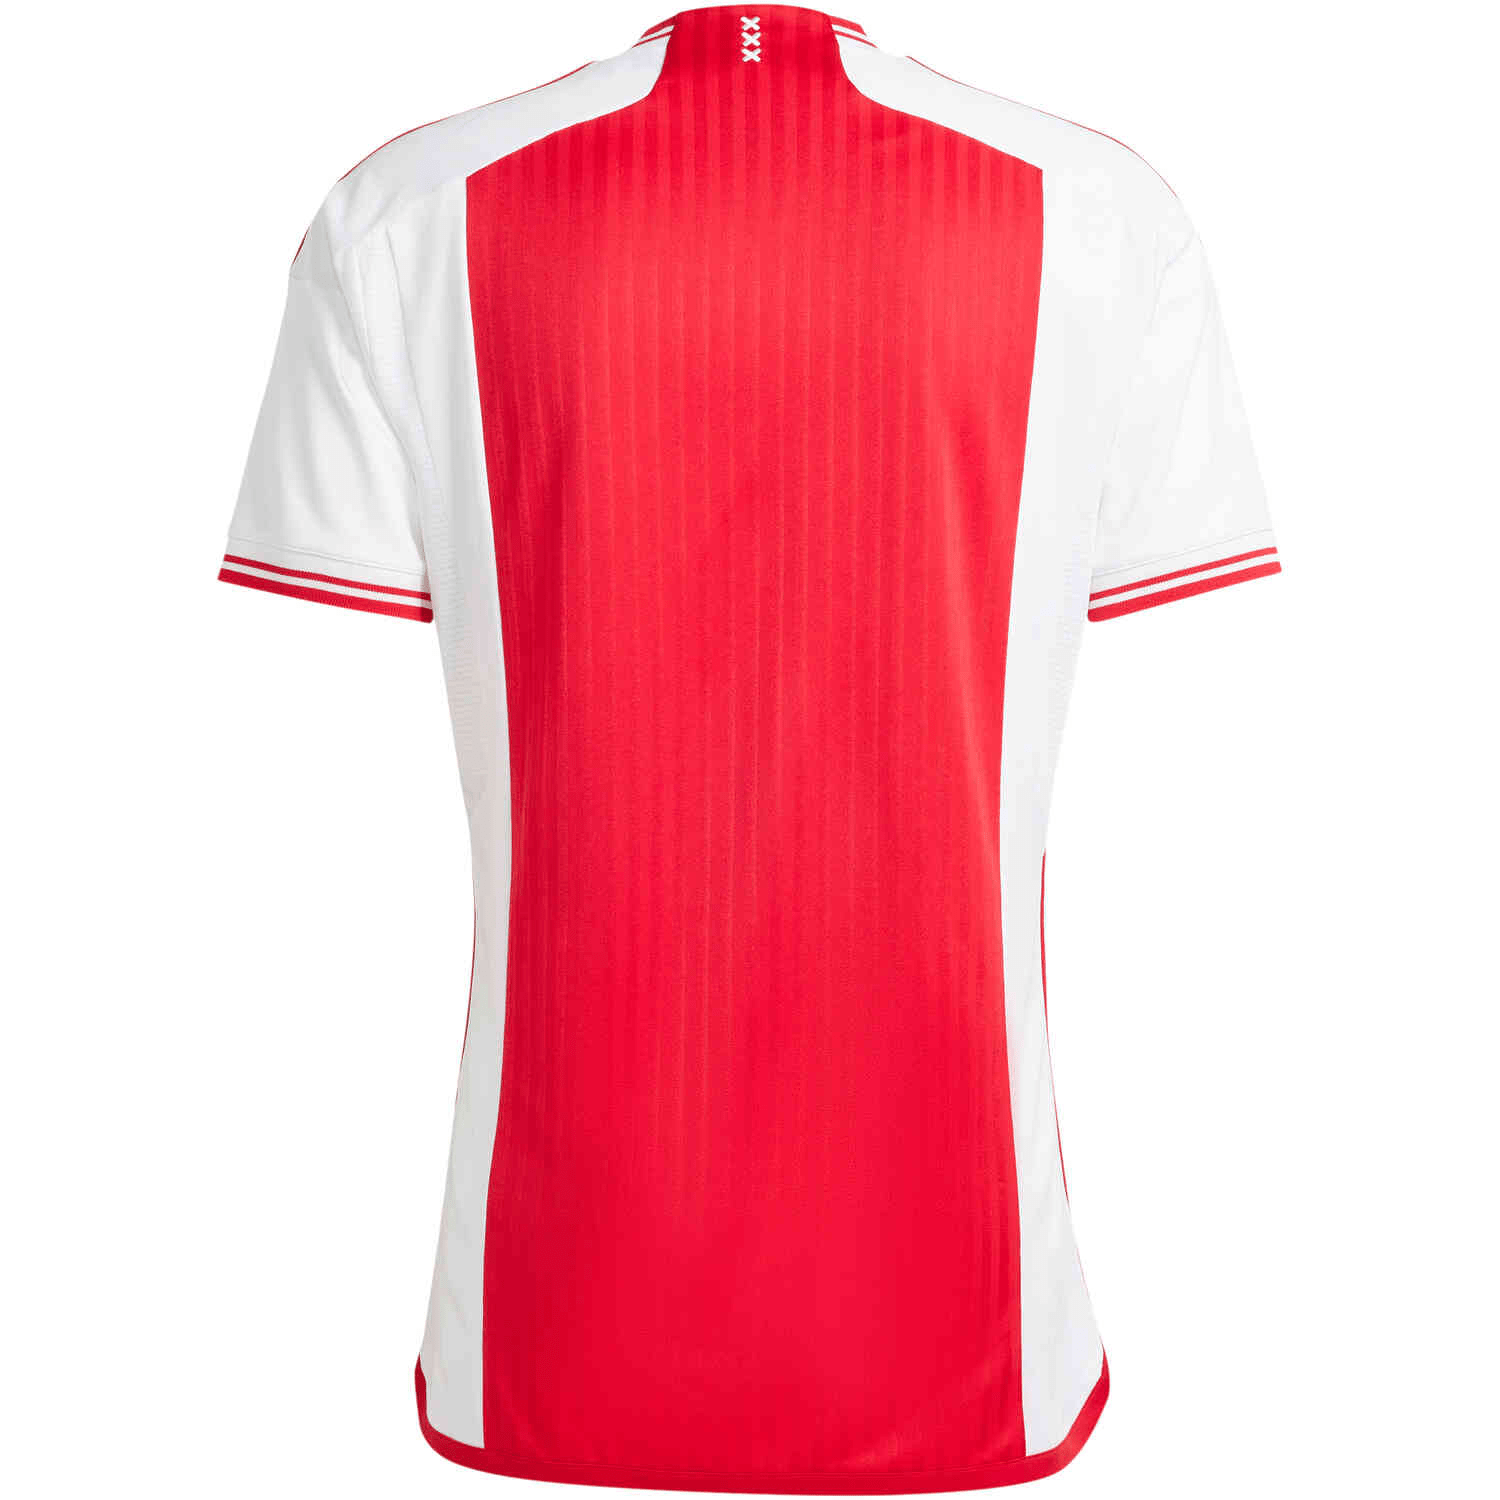 Ajax 23/24 Home Jersey by adidas